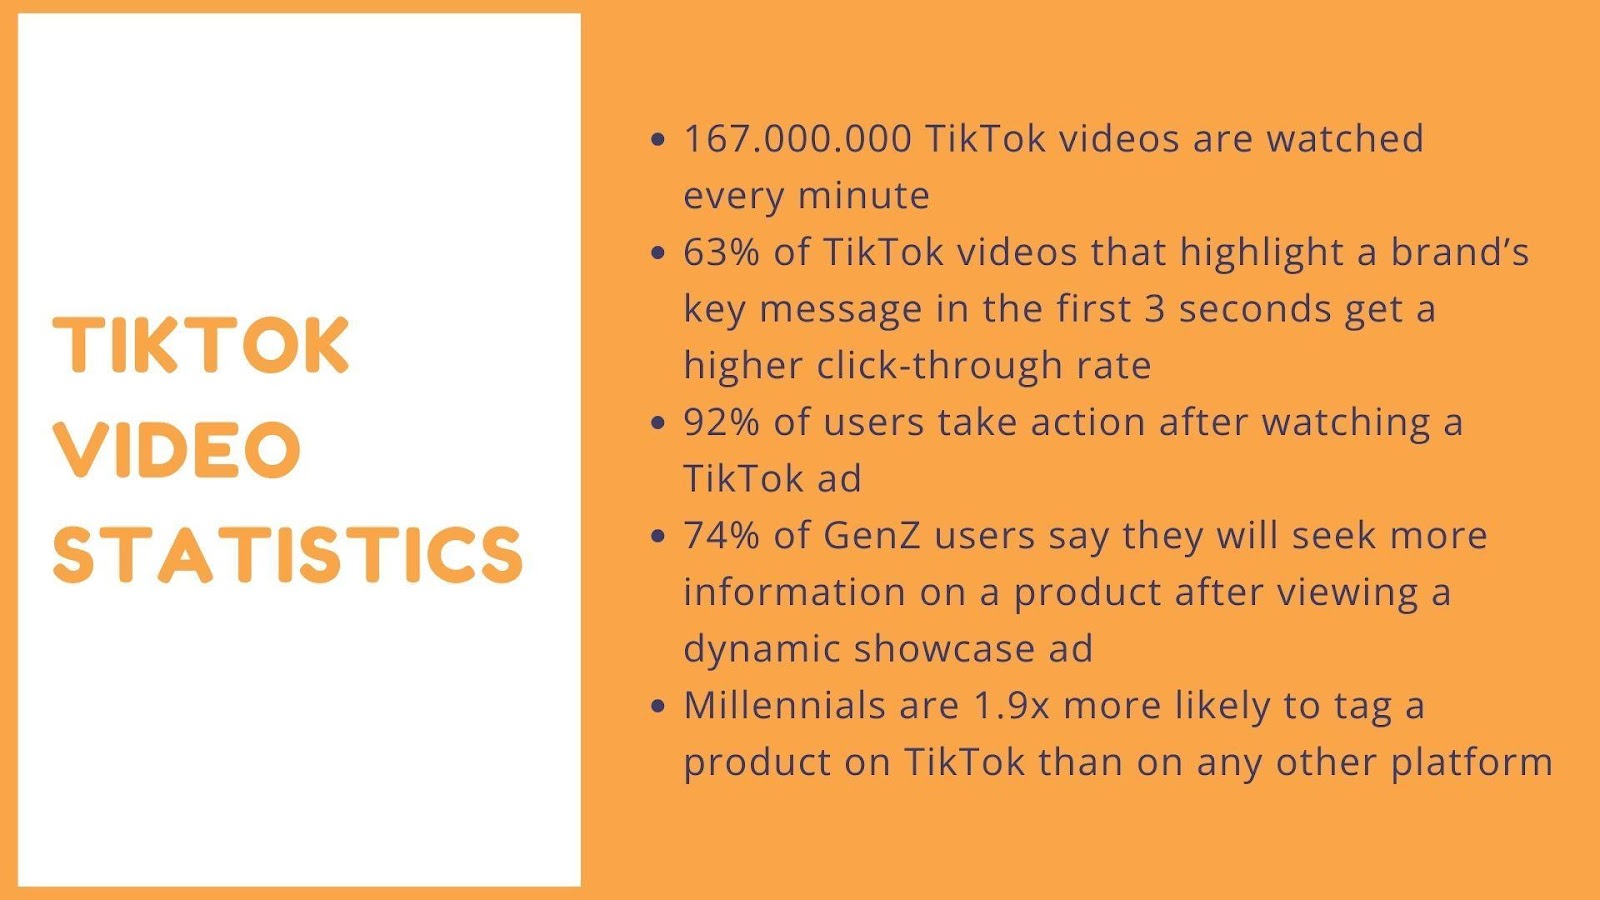 167.000.000 TikTok videos are watched every minute, 63% of TikTok videos that highlight a brand’s key message in the first 3 seconds get a higher click-through rate, 92% of users take action after watching a TikTok ad, 74% of GenZ users say they will seek more information on a product after viewing a dynamic showcase ad, Millennials are 1.9x more likely to tag a product on TikTok than on any other platform